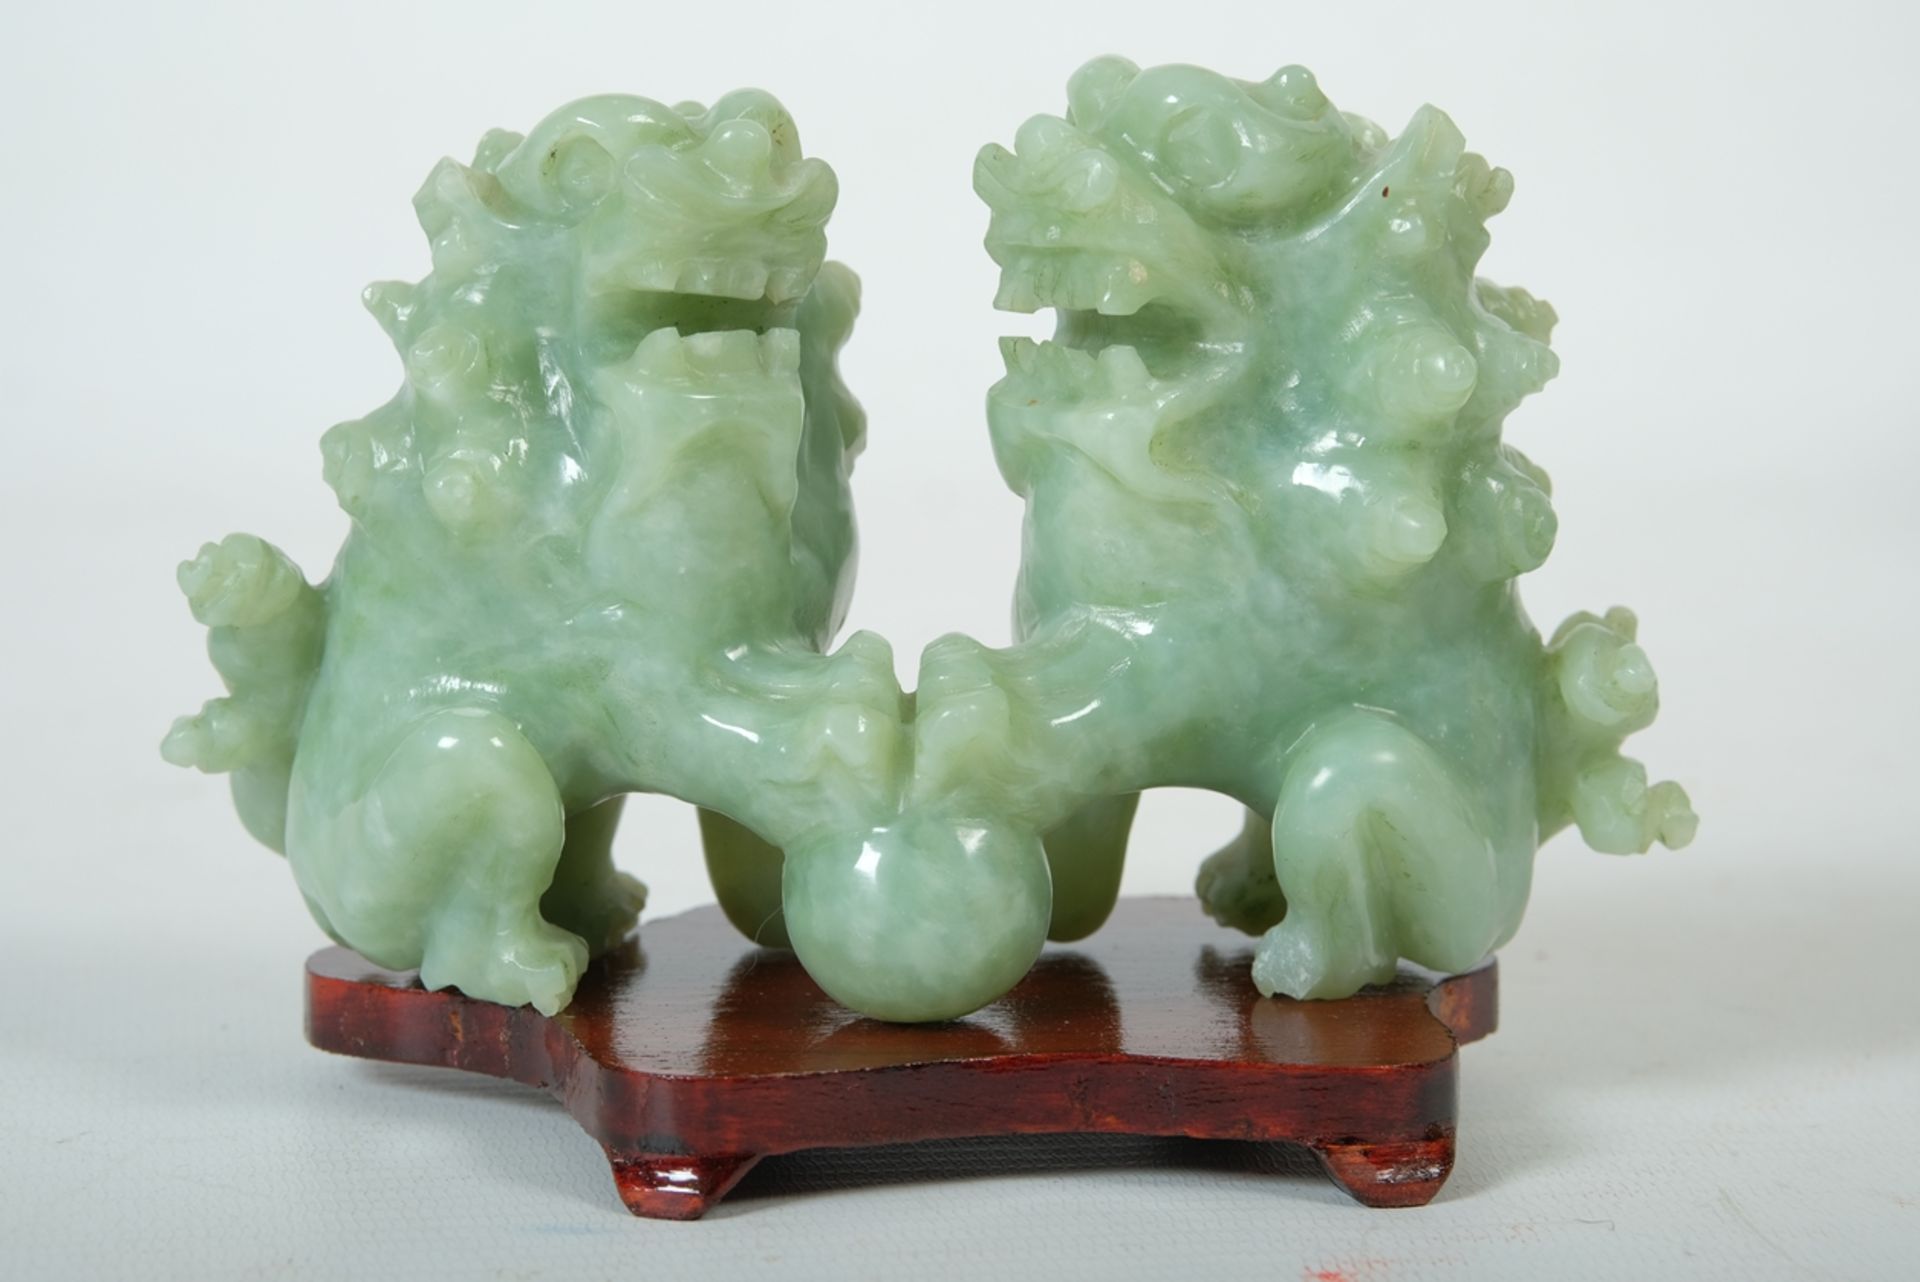 Guardian lions made of jade, China, with base